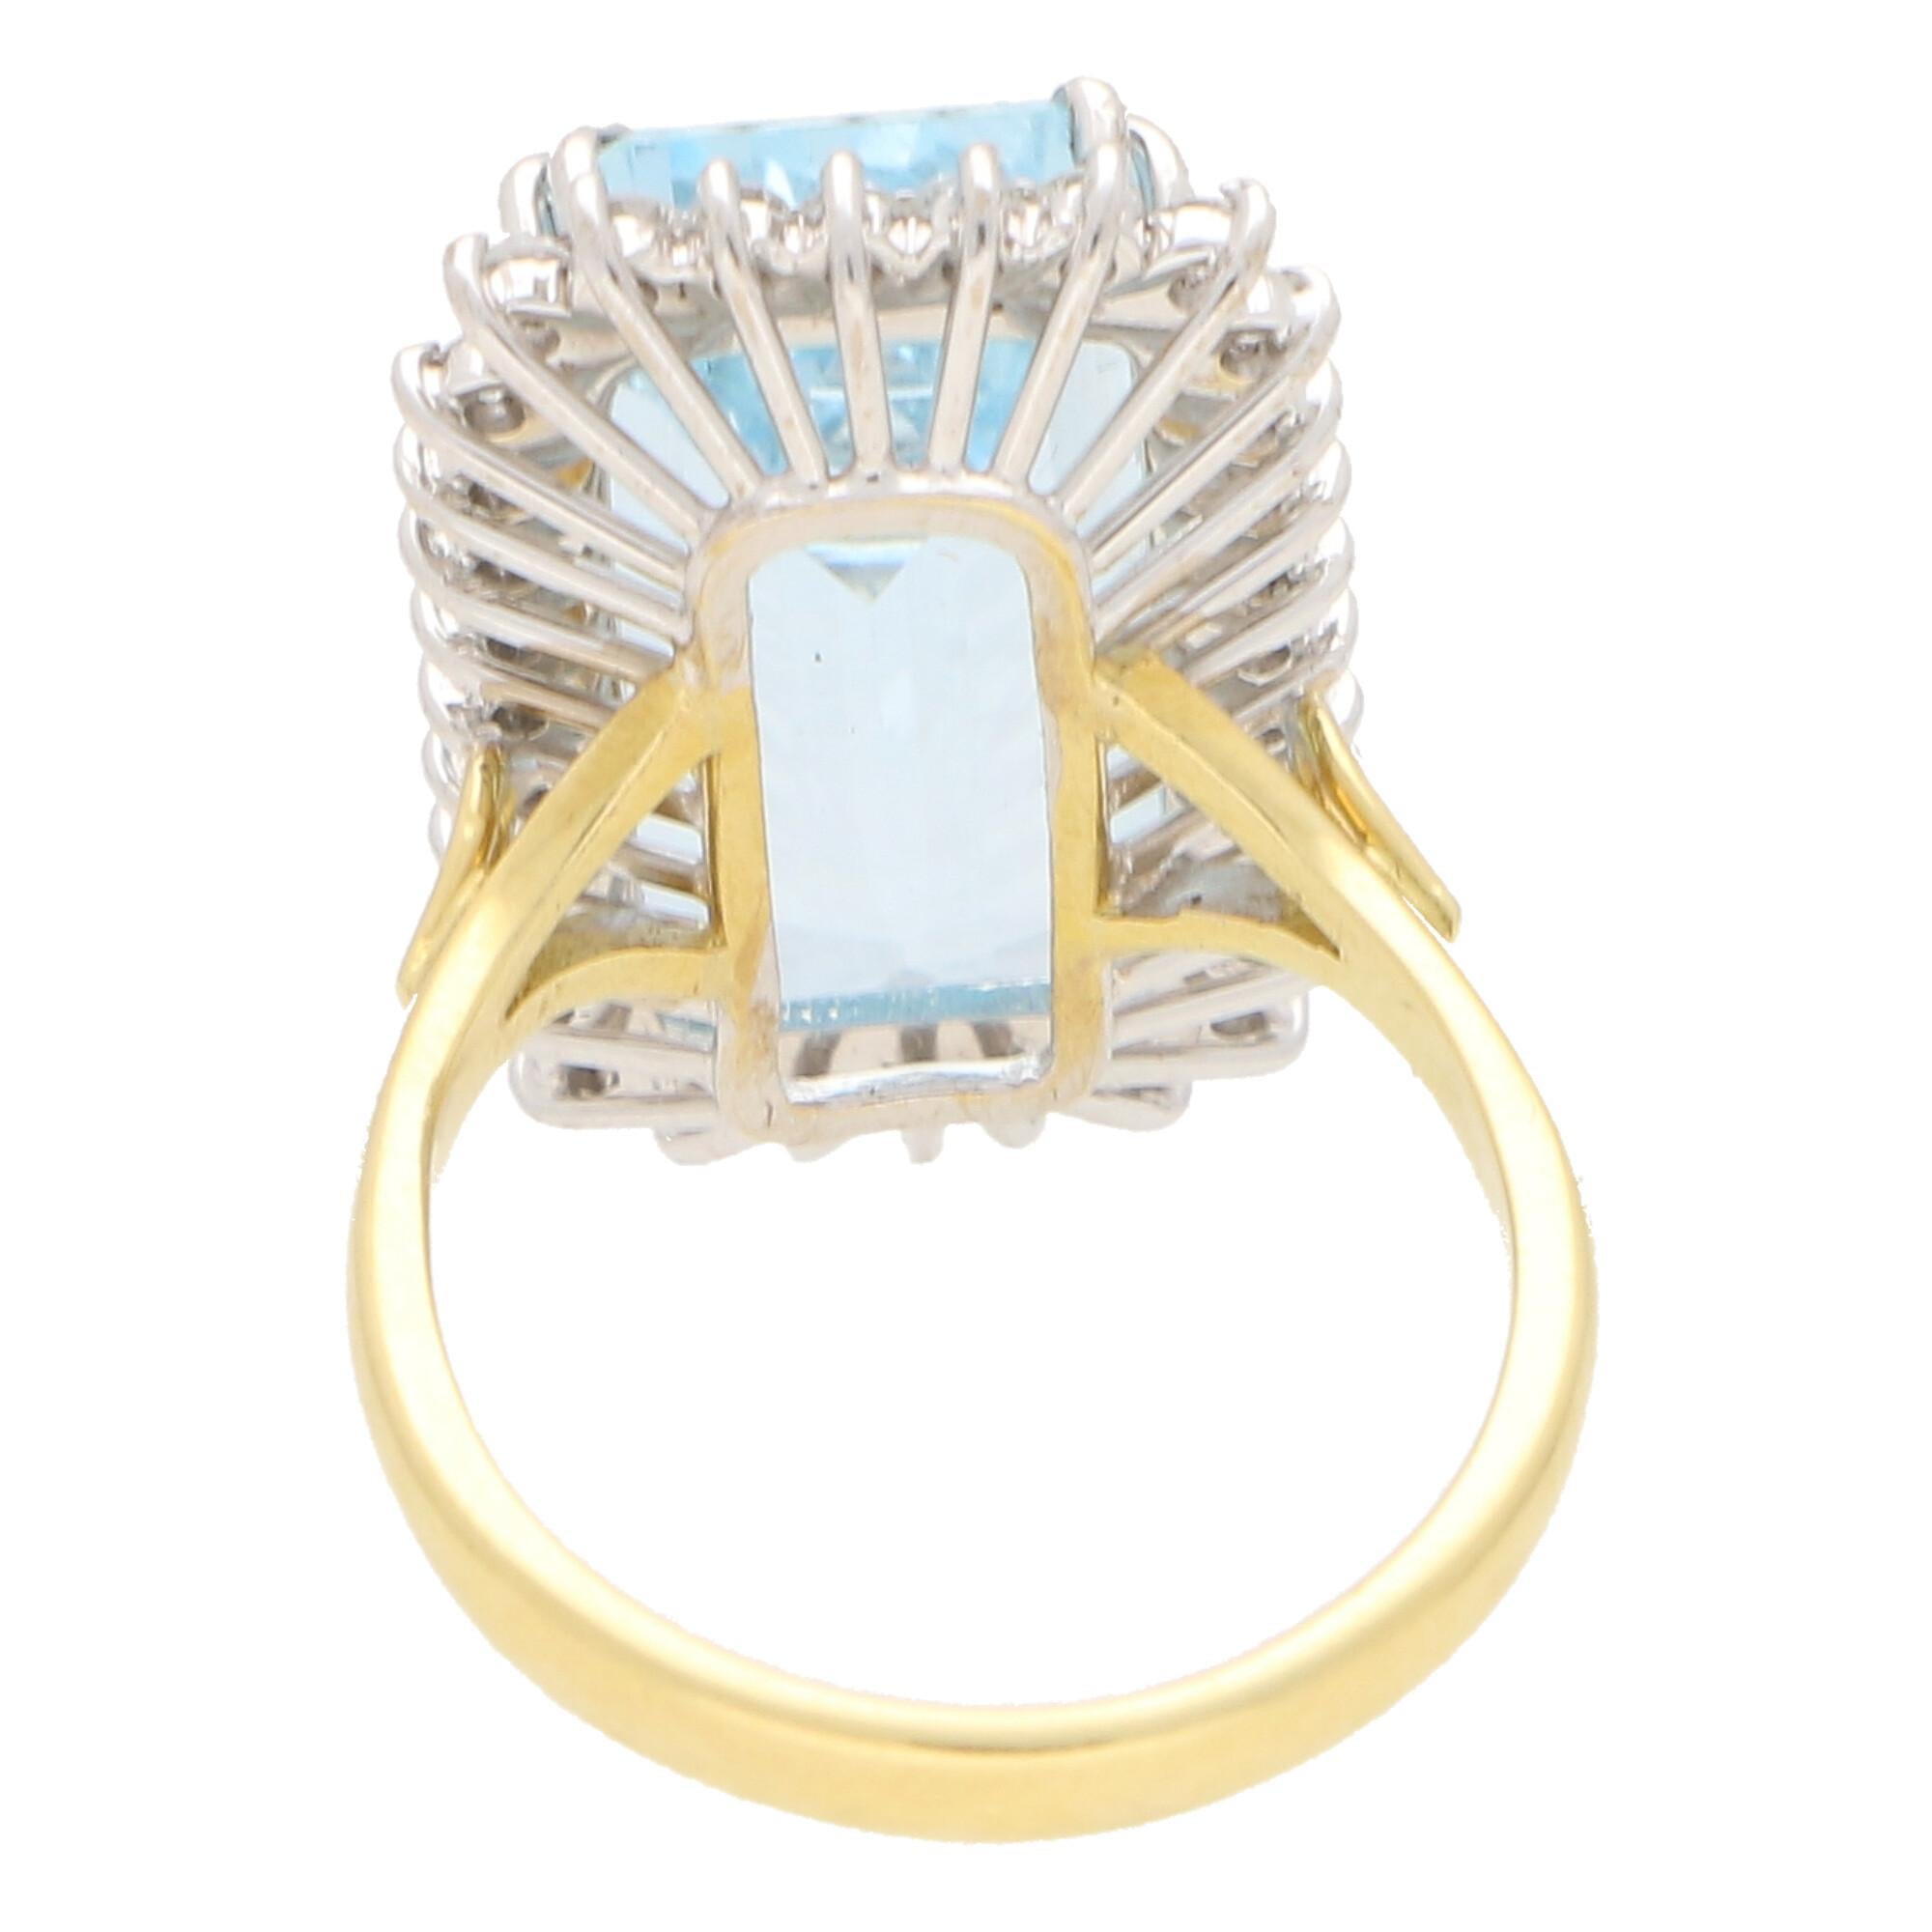 Women's or Men's Contemporary Aquamarine and Diamond Cocktail Ring in 18k Yellow and White Gold